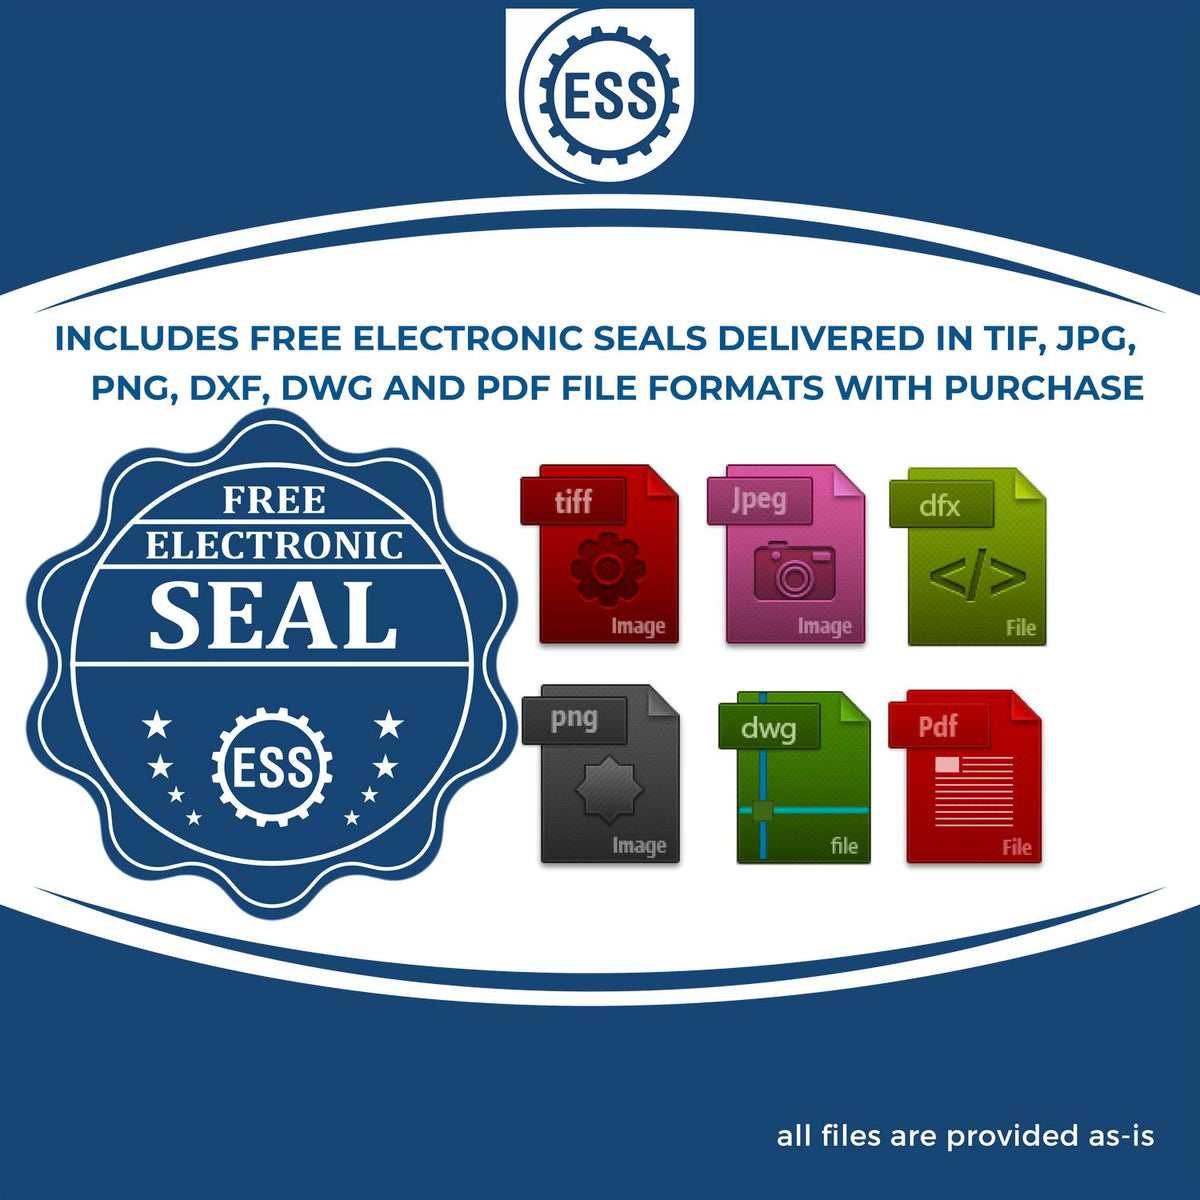 An infographic for the free electronic seal for the Premium MaxLight Pre-Inked Wyoming Engineering Stamp illustrating the different file type icons such as DXF, DWG, TIF, JPG and PNG.